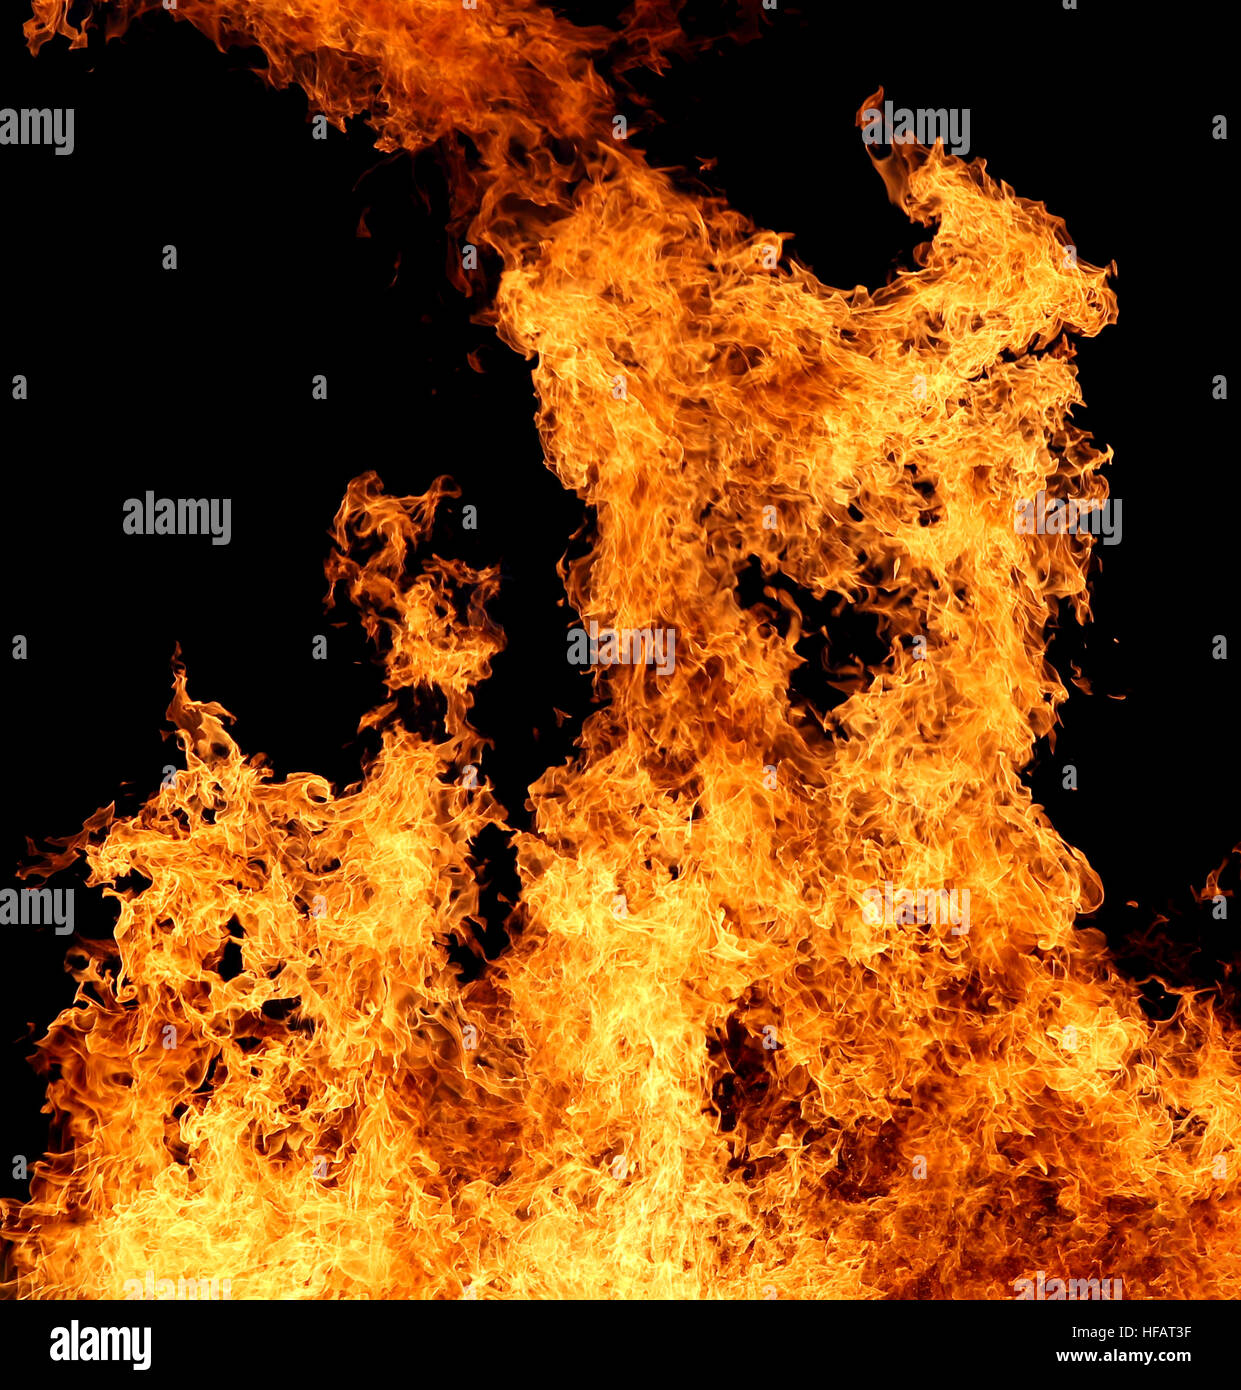 large orange and red flame and black background Stock Photo